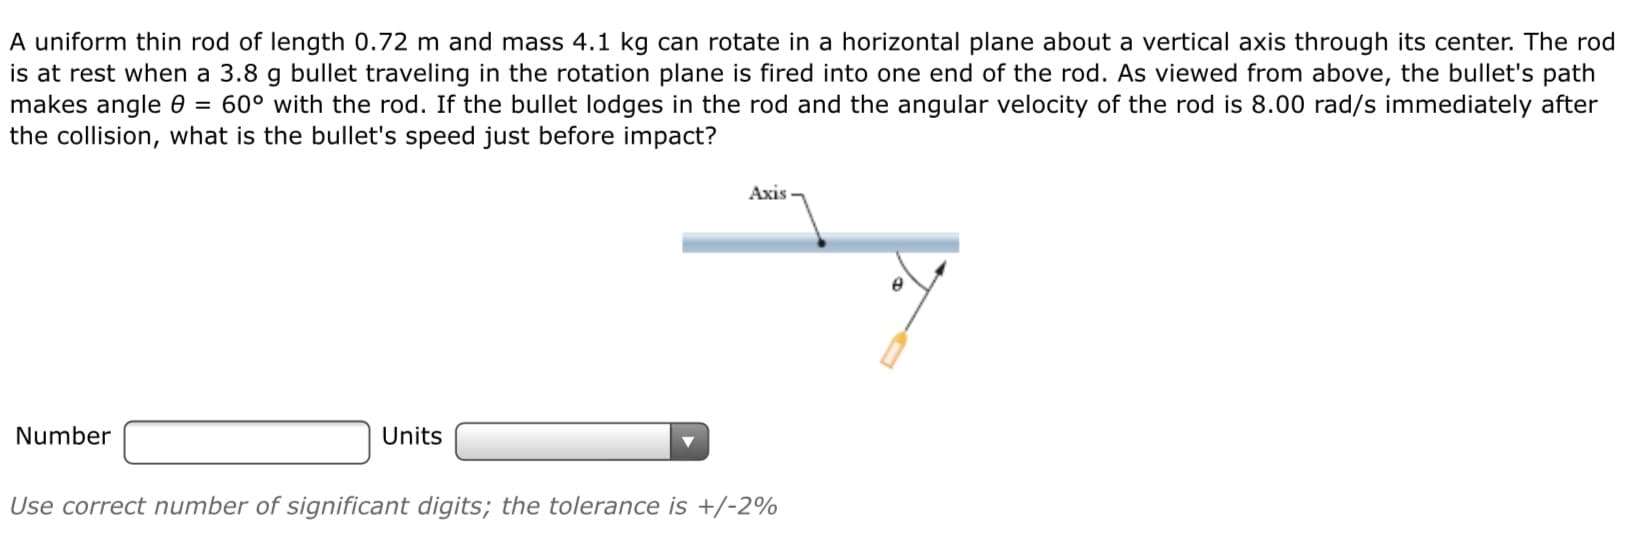 A uniform thin rod of length 0.72 m and mass 4.1 kg can rotate in a horizontal plane about a vertical axis through its center. The rod
is at rest when a 3.8 g bullet traveling in the rotation plane is fired into one end of the rod. As viewed from above, the bullet's path
makes angle 0 = 60° with the rod. If the bullet lodges in the rod and the angular velocity of the rod is 8.00 rad/s immediately after
the collision, what is the bullet's speed just before impact?
Axis
Number
Units
Use correct number of significant digits; the tolerance is +/-2%
